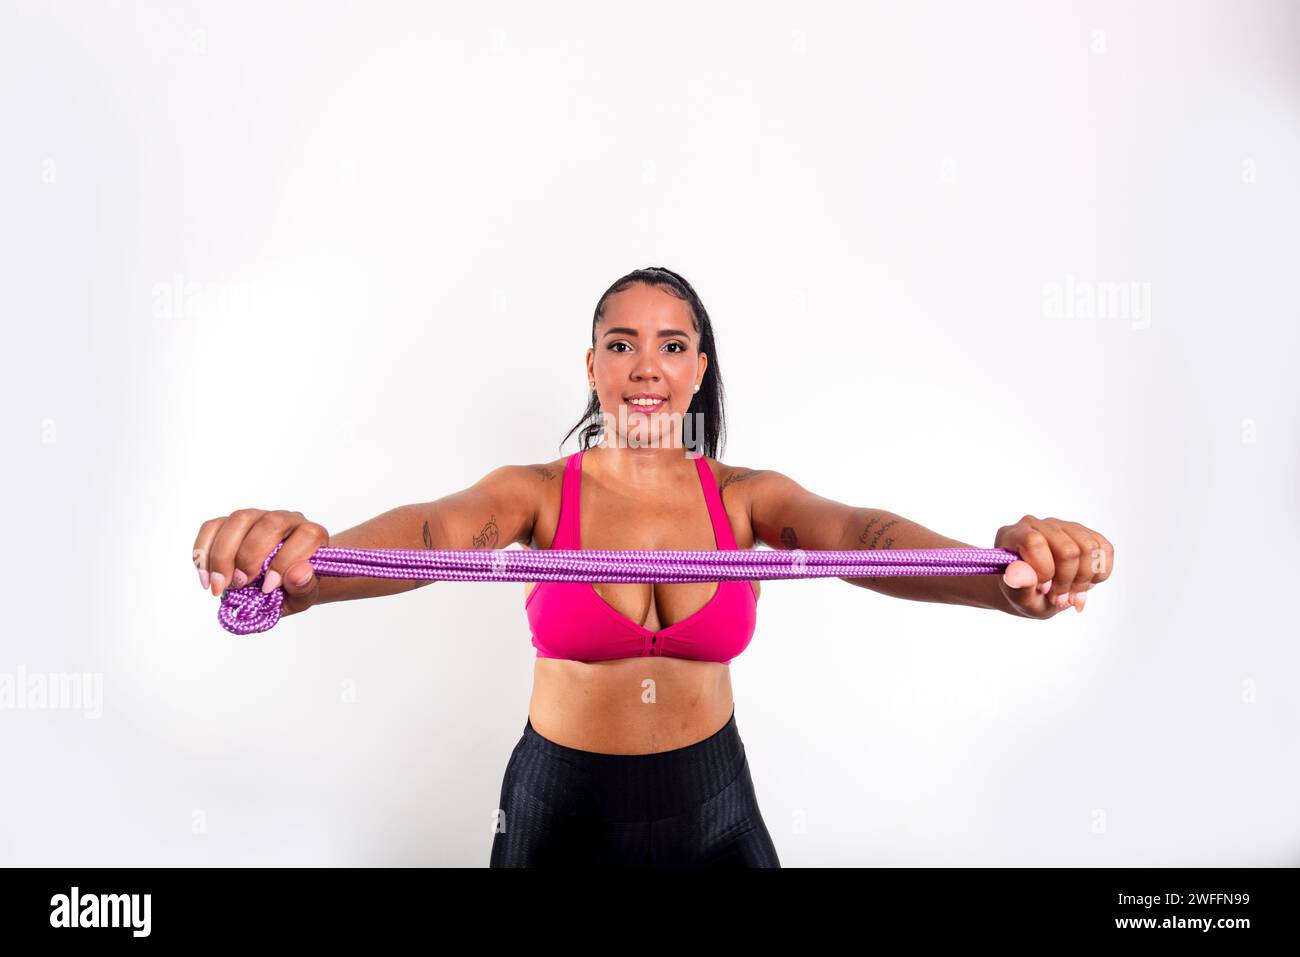 Young gymnast woman holding lilac colored rope for stretching. Against white background. Olympic athlete. Stock Photo